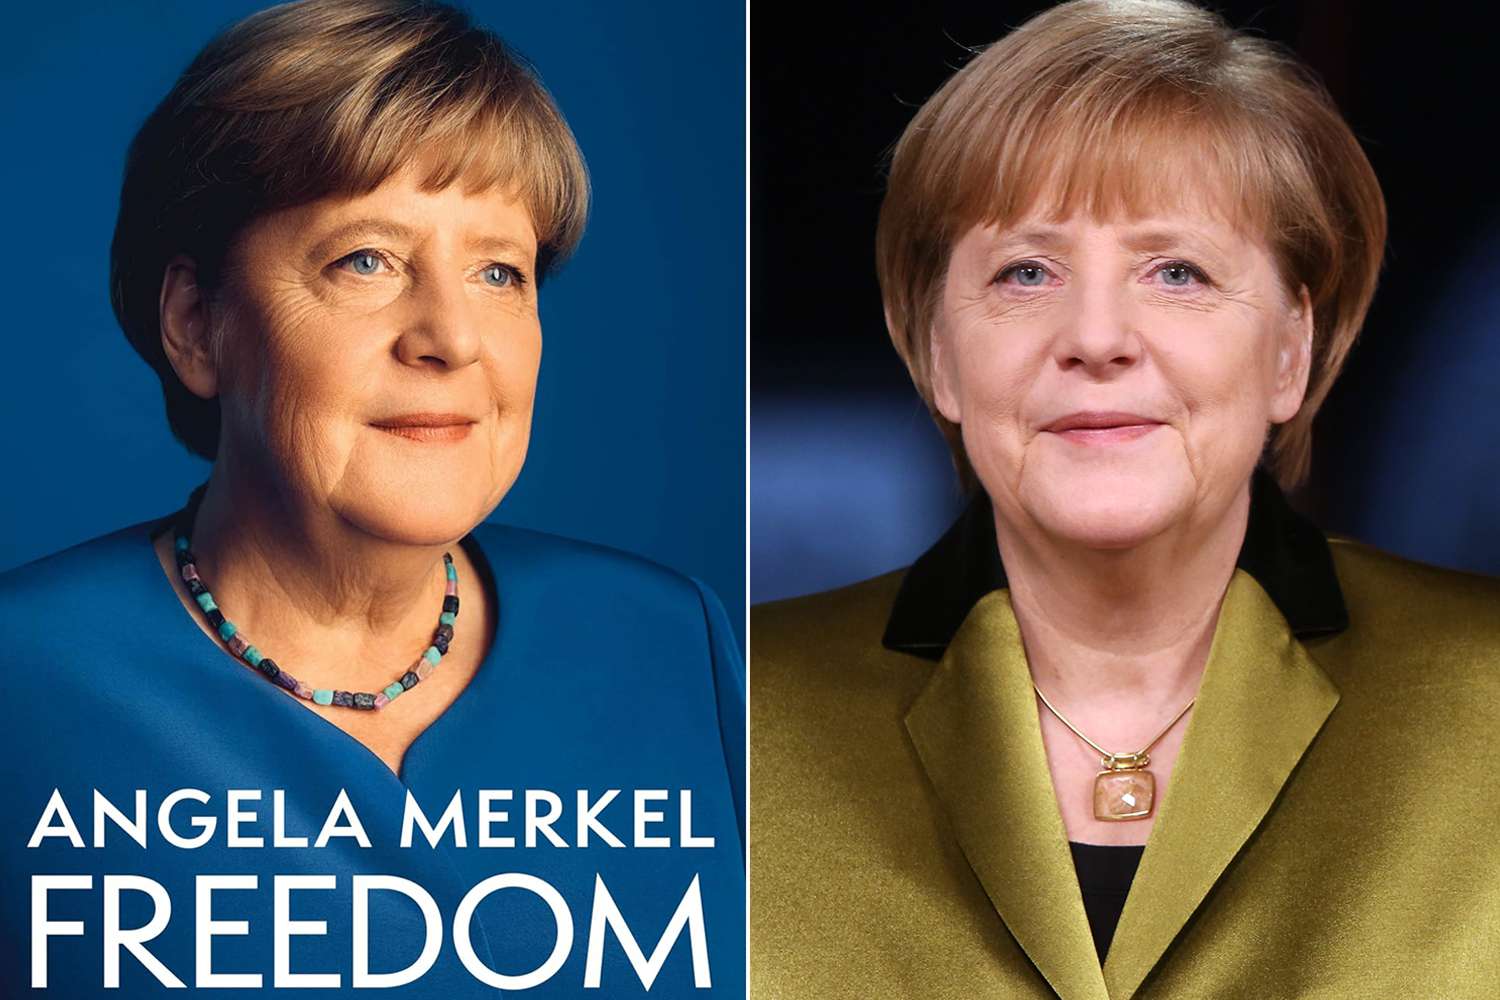 Angela Merkel to Publish New Political Memoir “Freedom: ”'Without Democracy, There Is No Freedom'